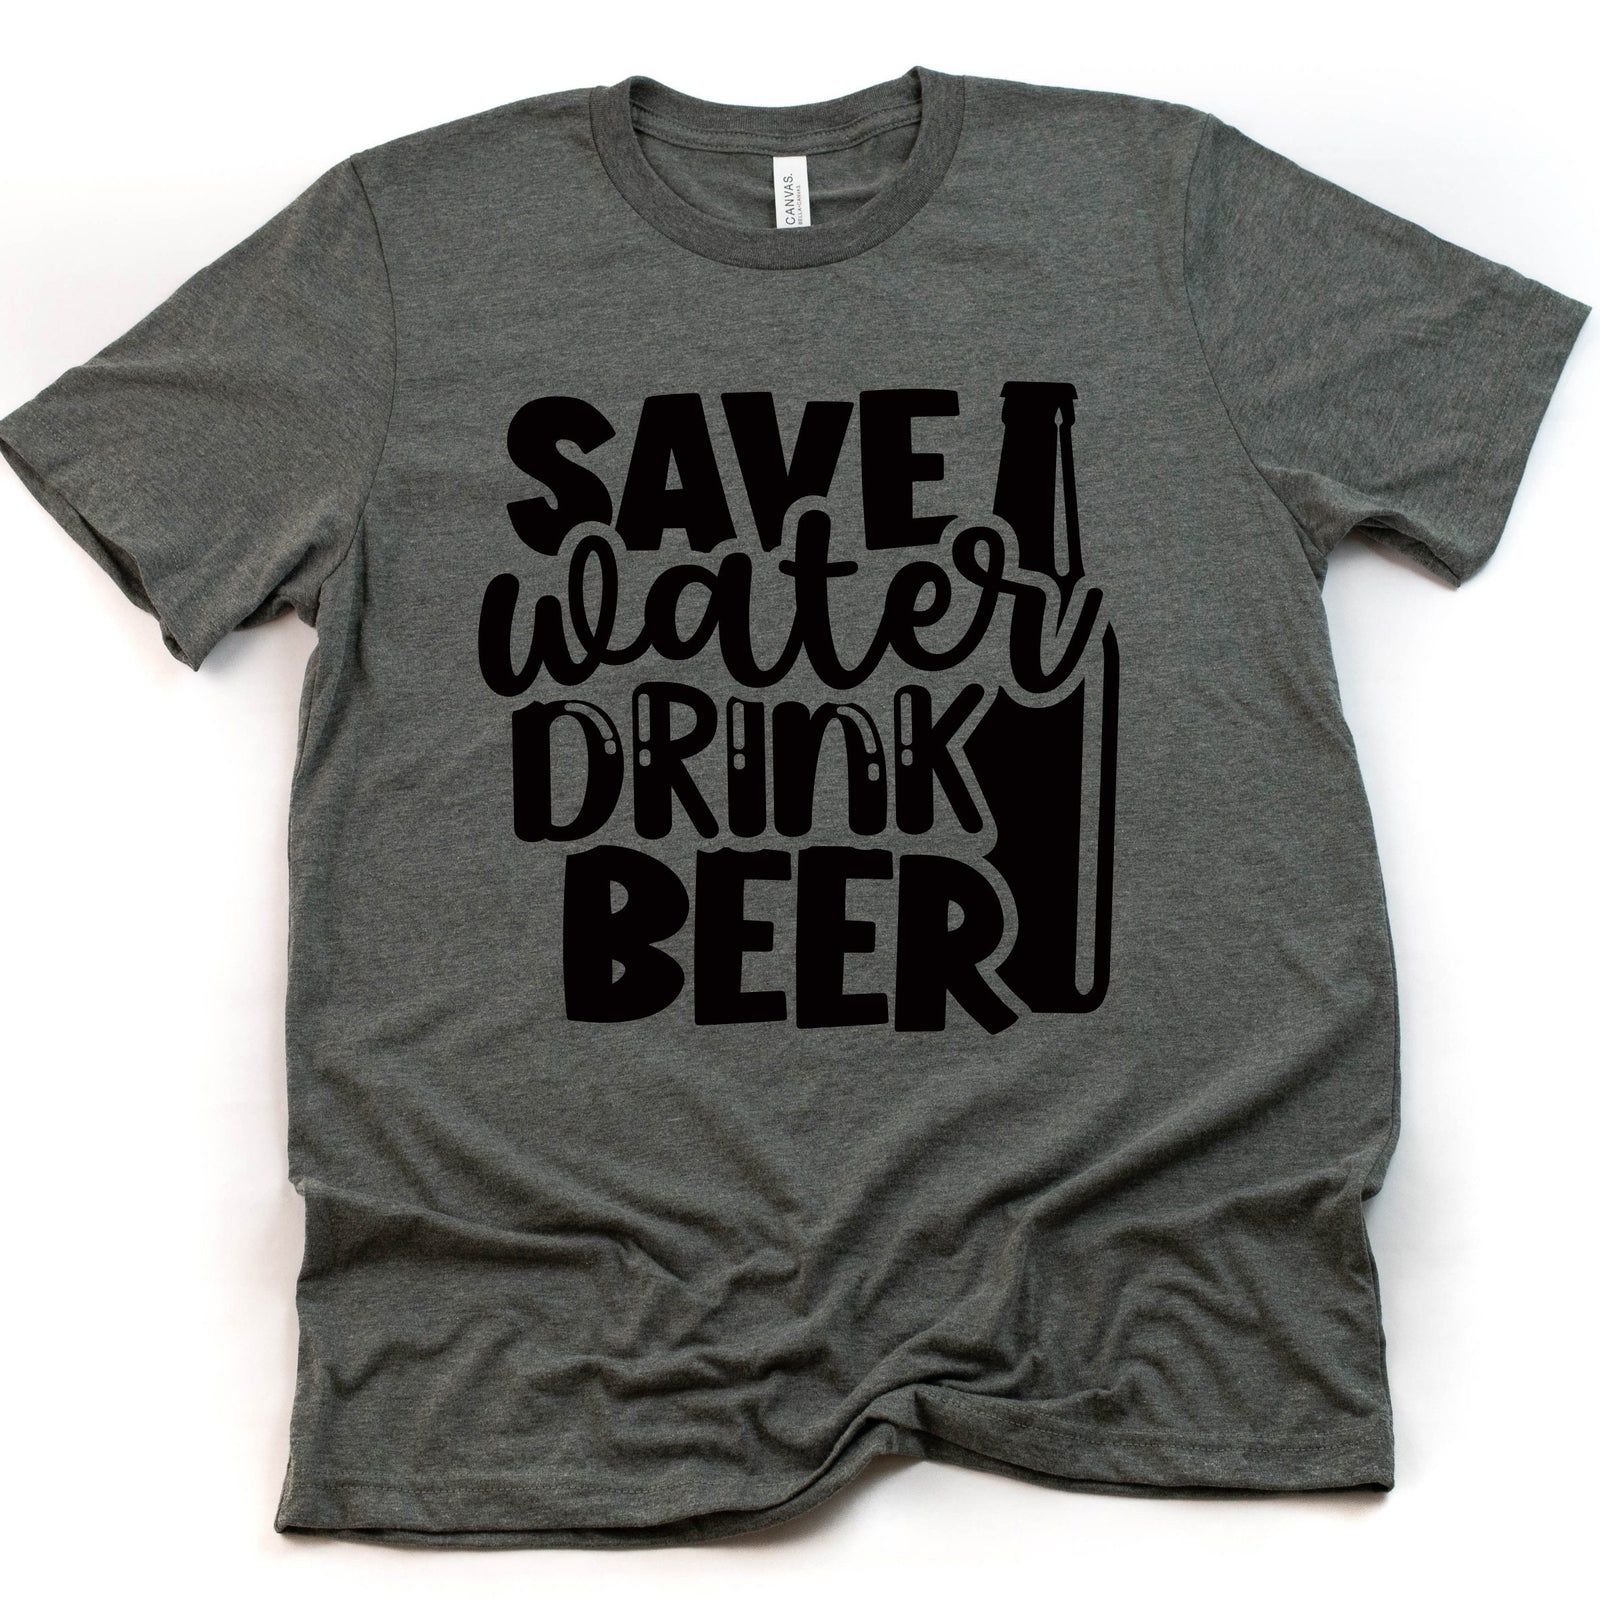 Save Water Drink Beer T Shirt- Funny Men's T-shirt - Beer Lover Statement Shirt - Beer Humor Shirt